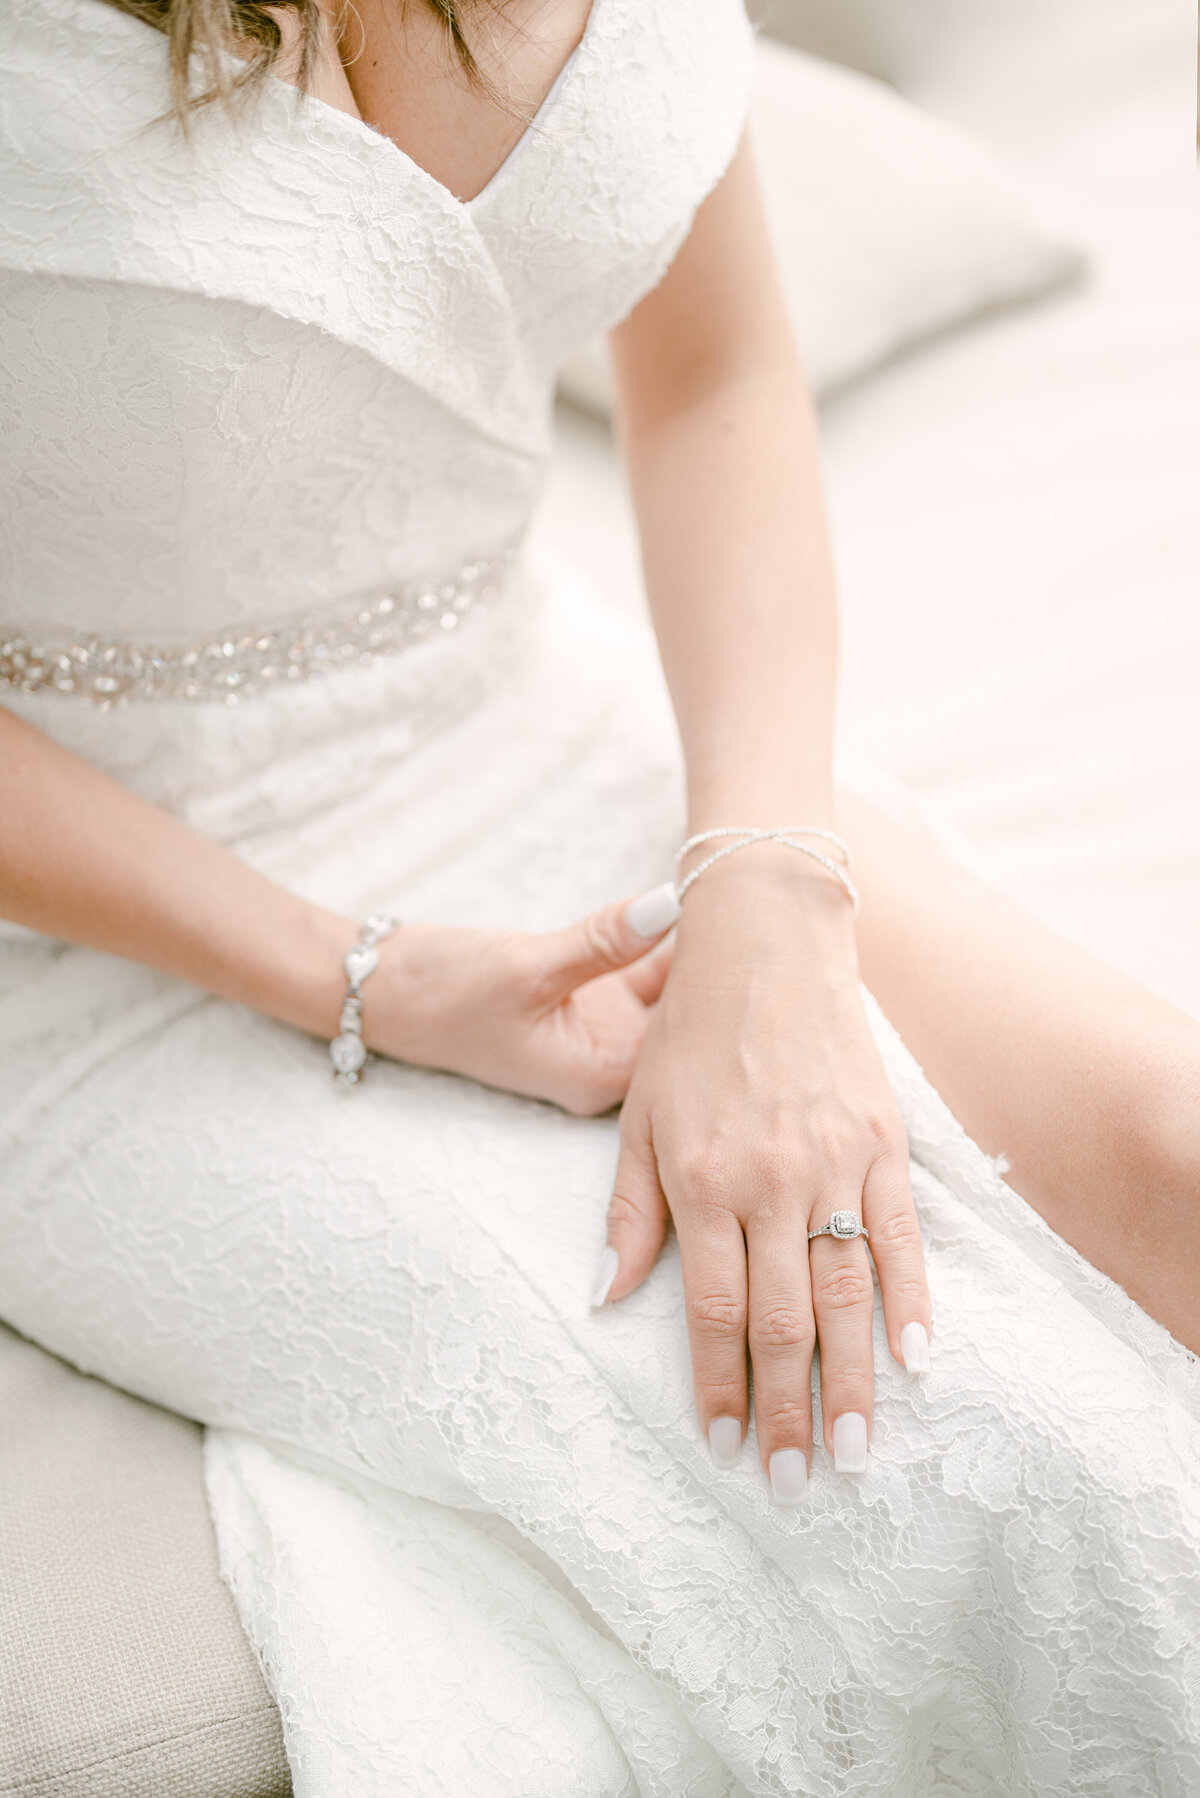 Engagement ring and bracelet of the bride